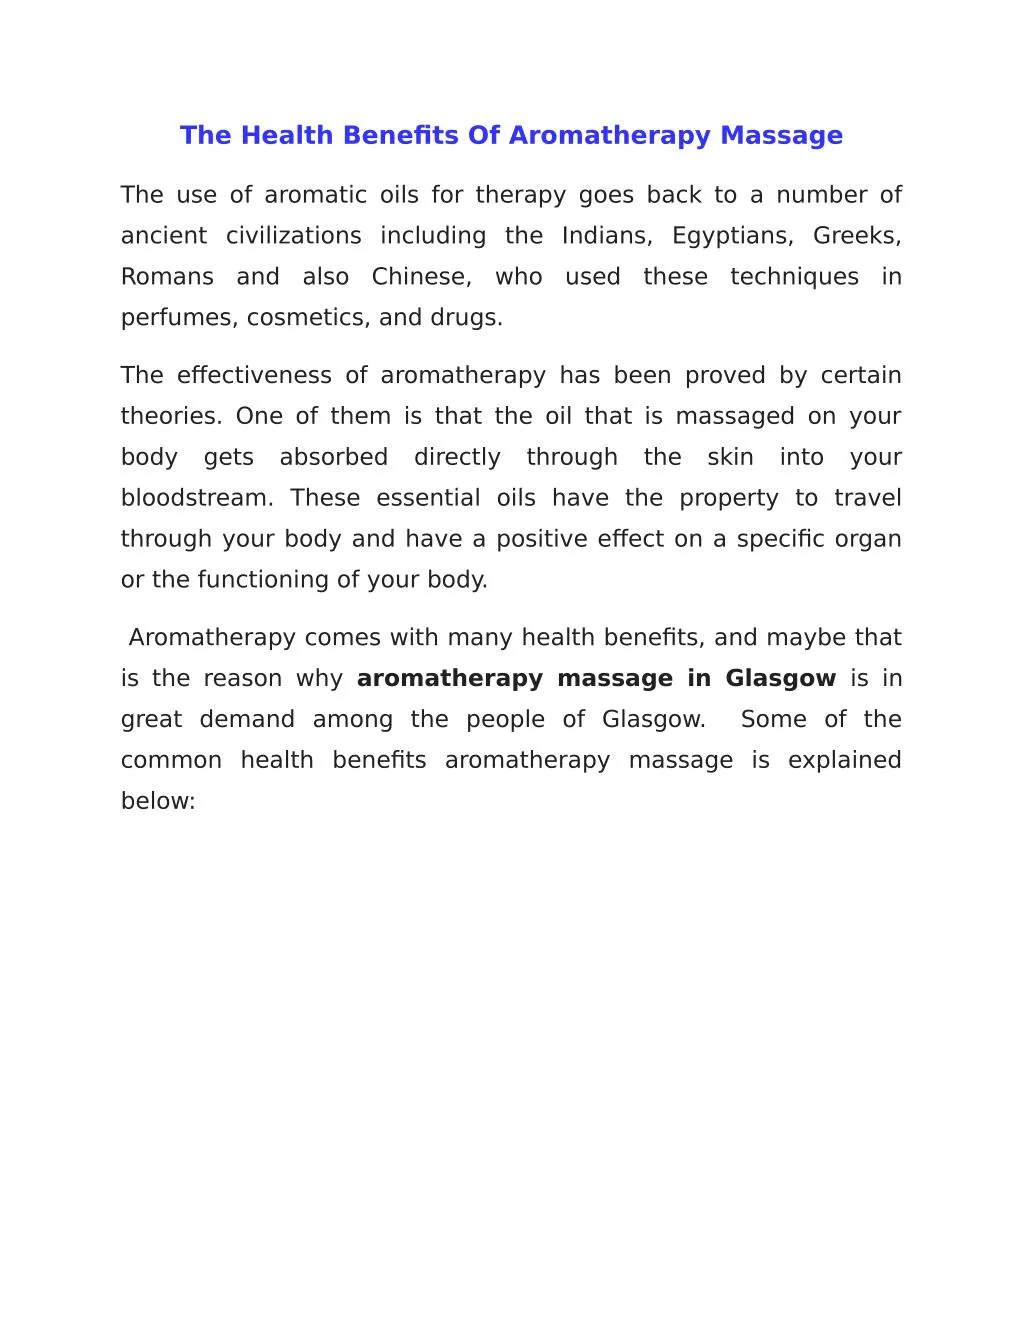 Ppt The Health Benefits Of Aromatherapy Massage Powerpoint Presentation Id7421914